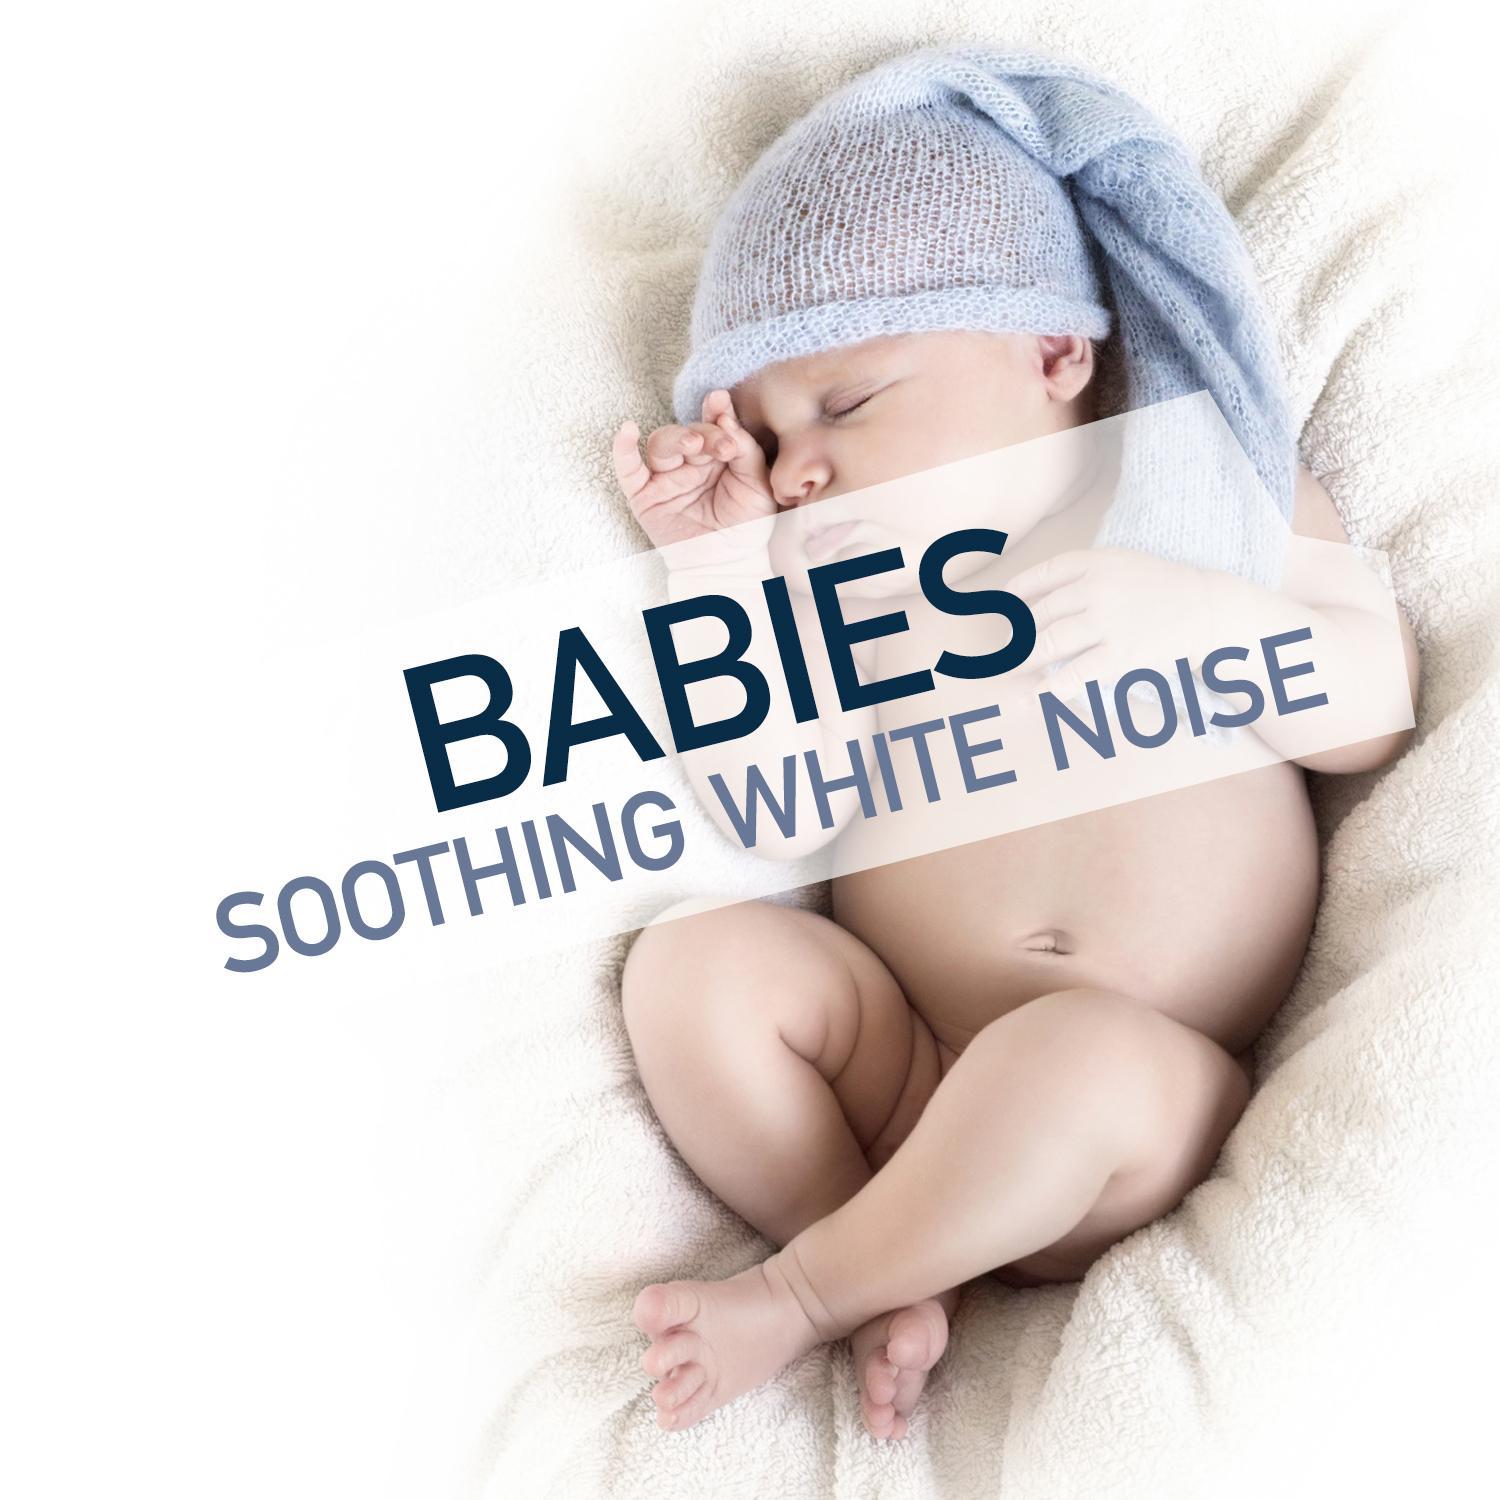 Babies: Soothing White Noise